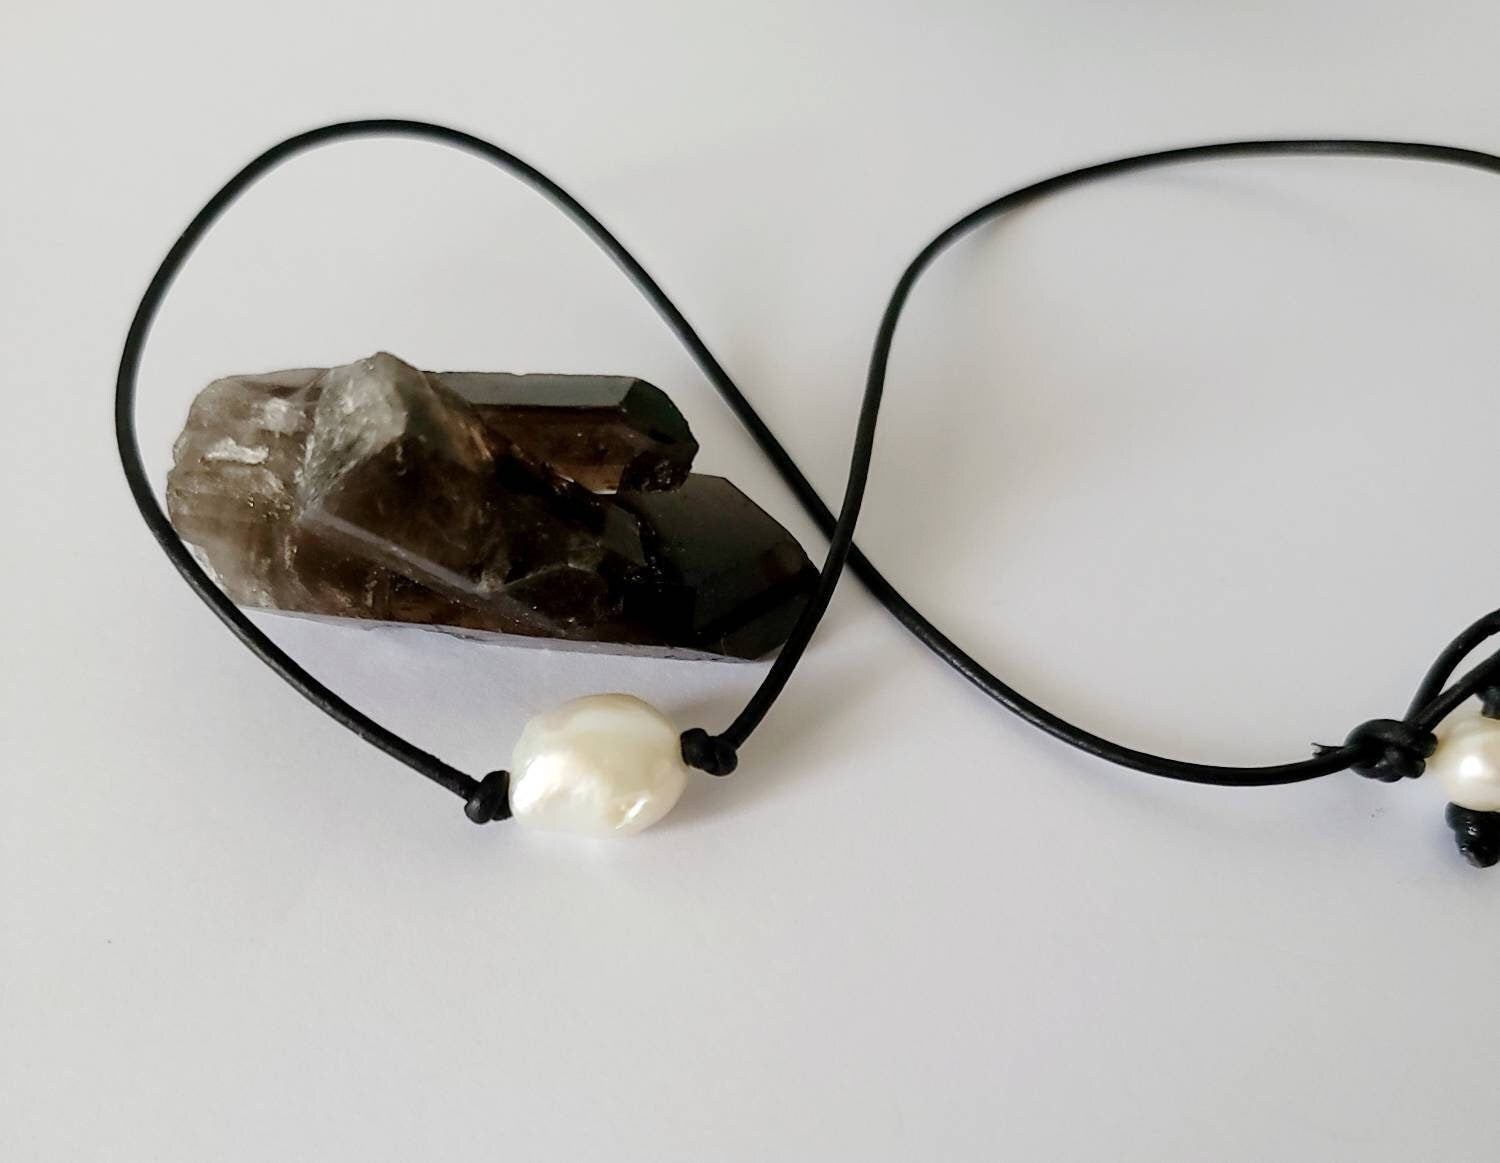 White Freshwater Pearl leather necklace,